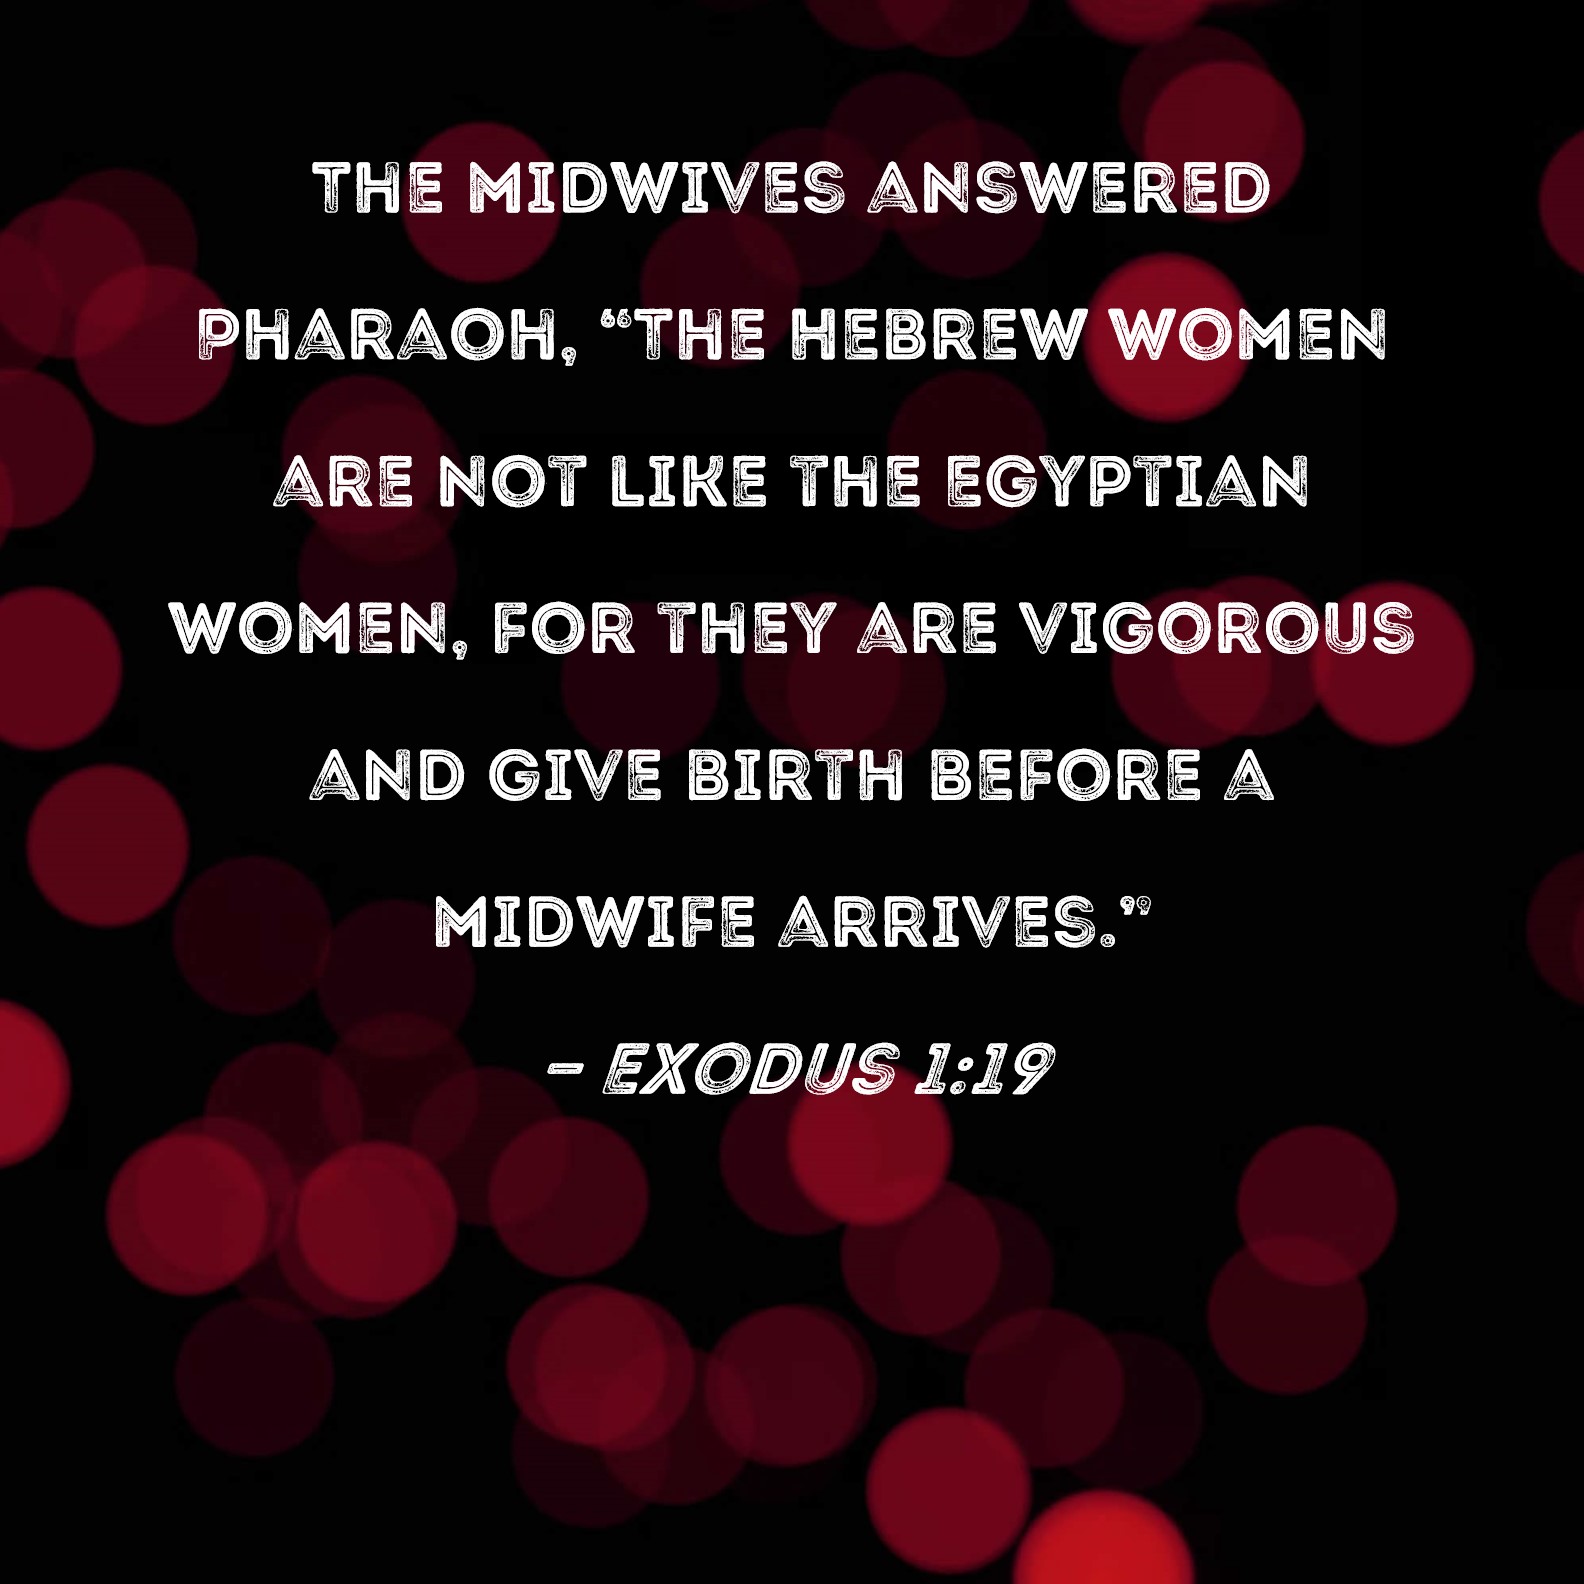 Exodus 1:19 The midwives answered Pharaoh, 